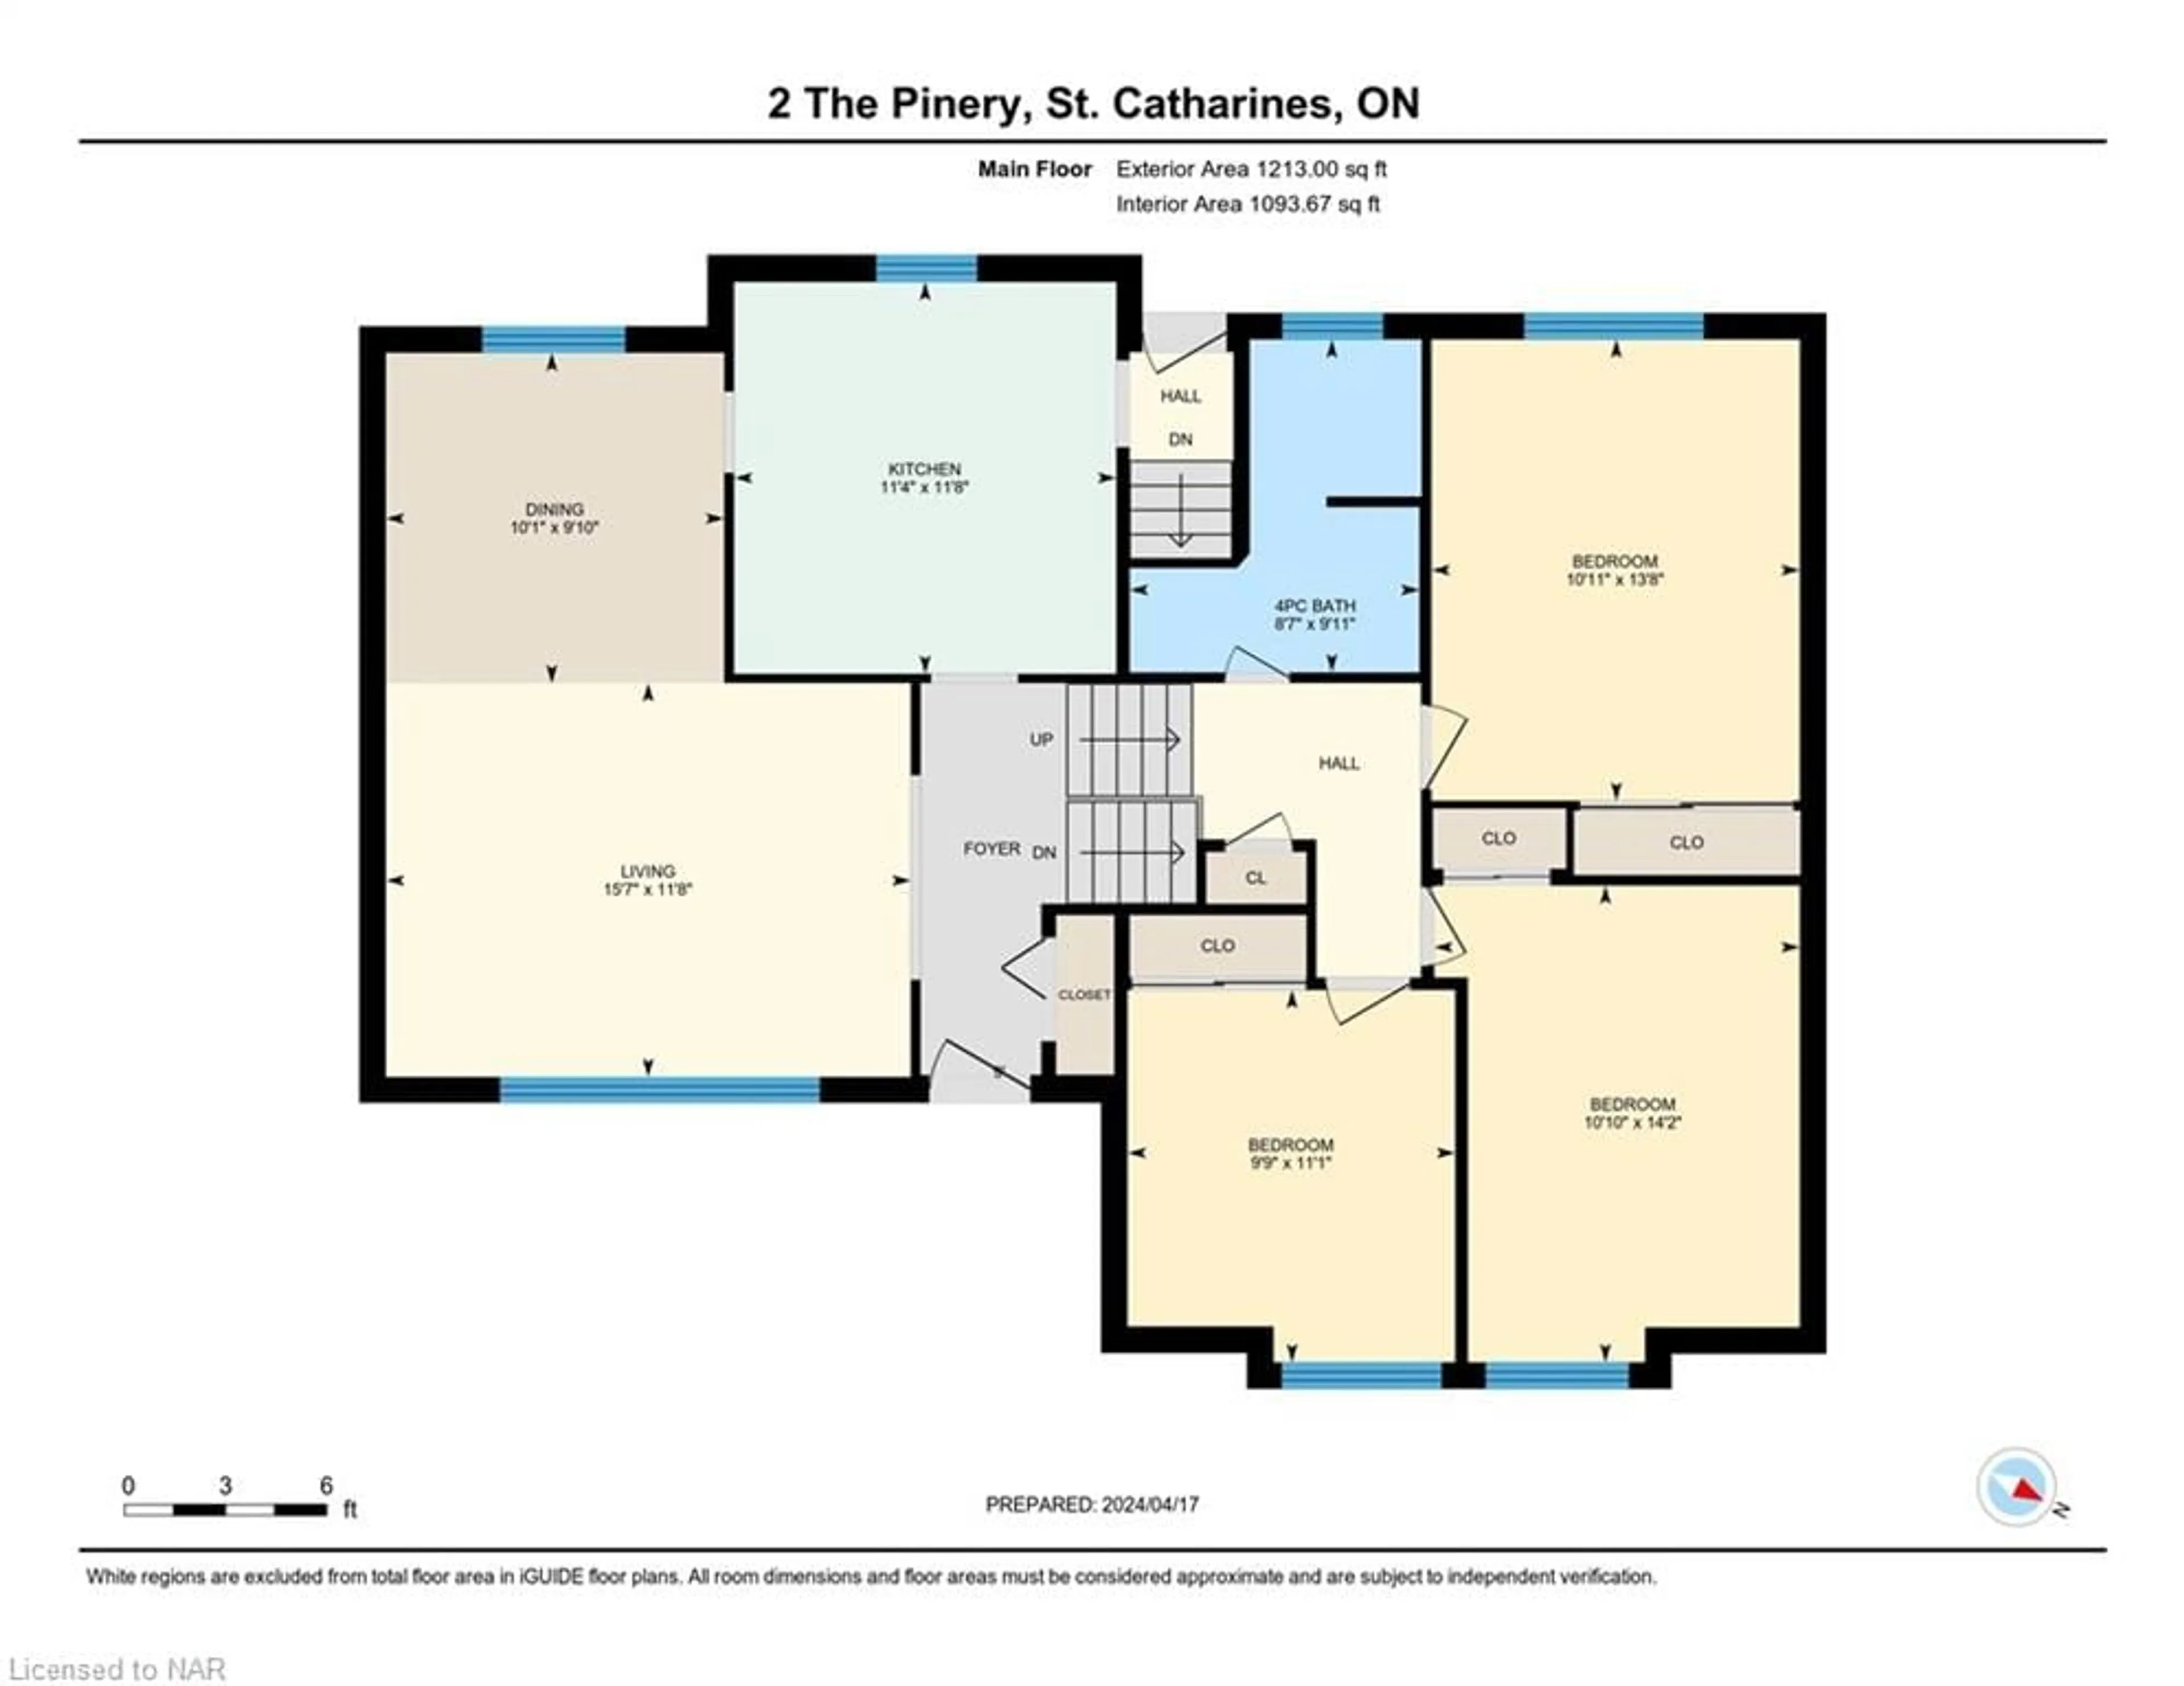 Floor plan for 2 The Pinery St, St. Catharines Ontario L2M 6M6